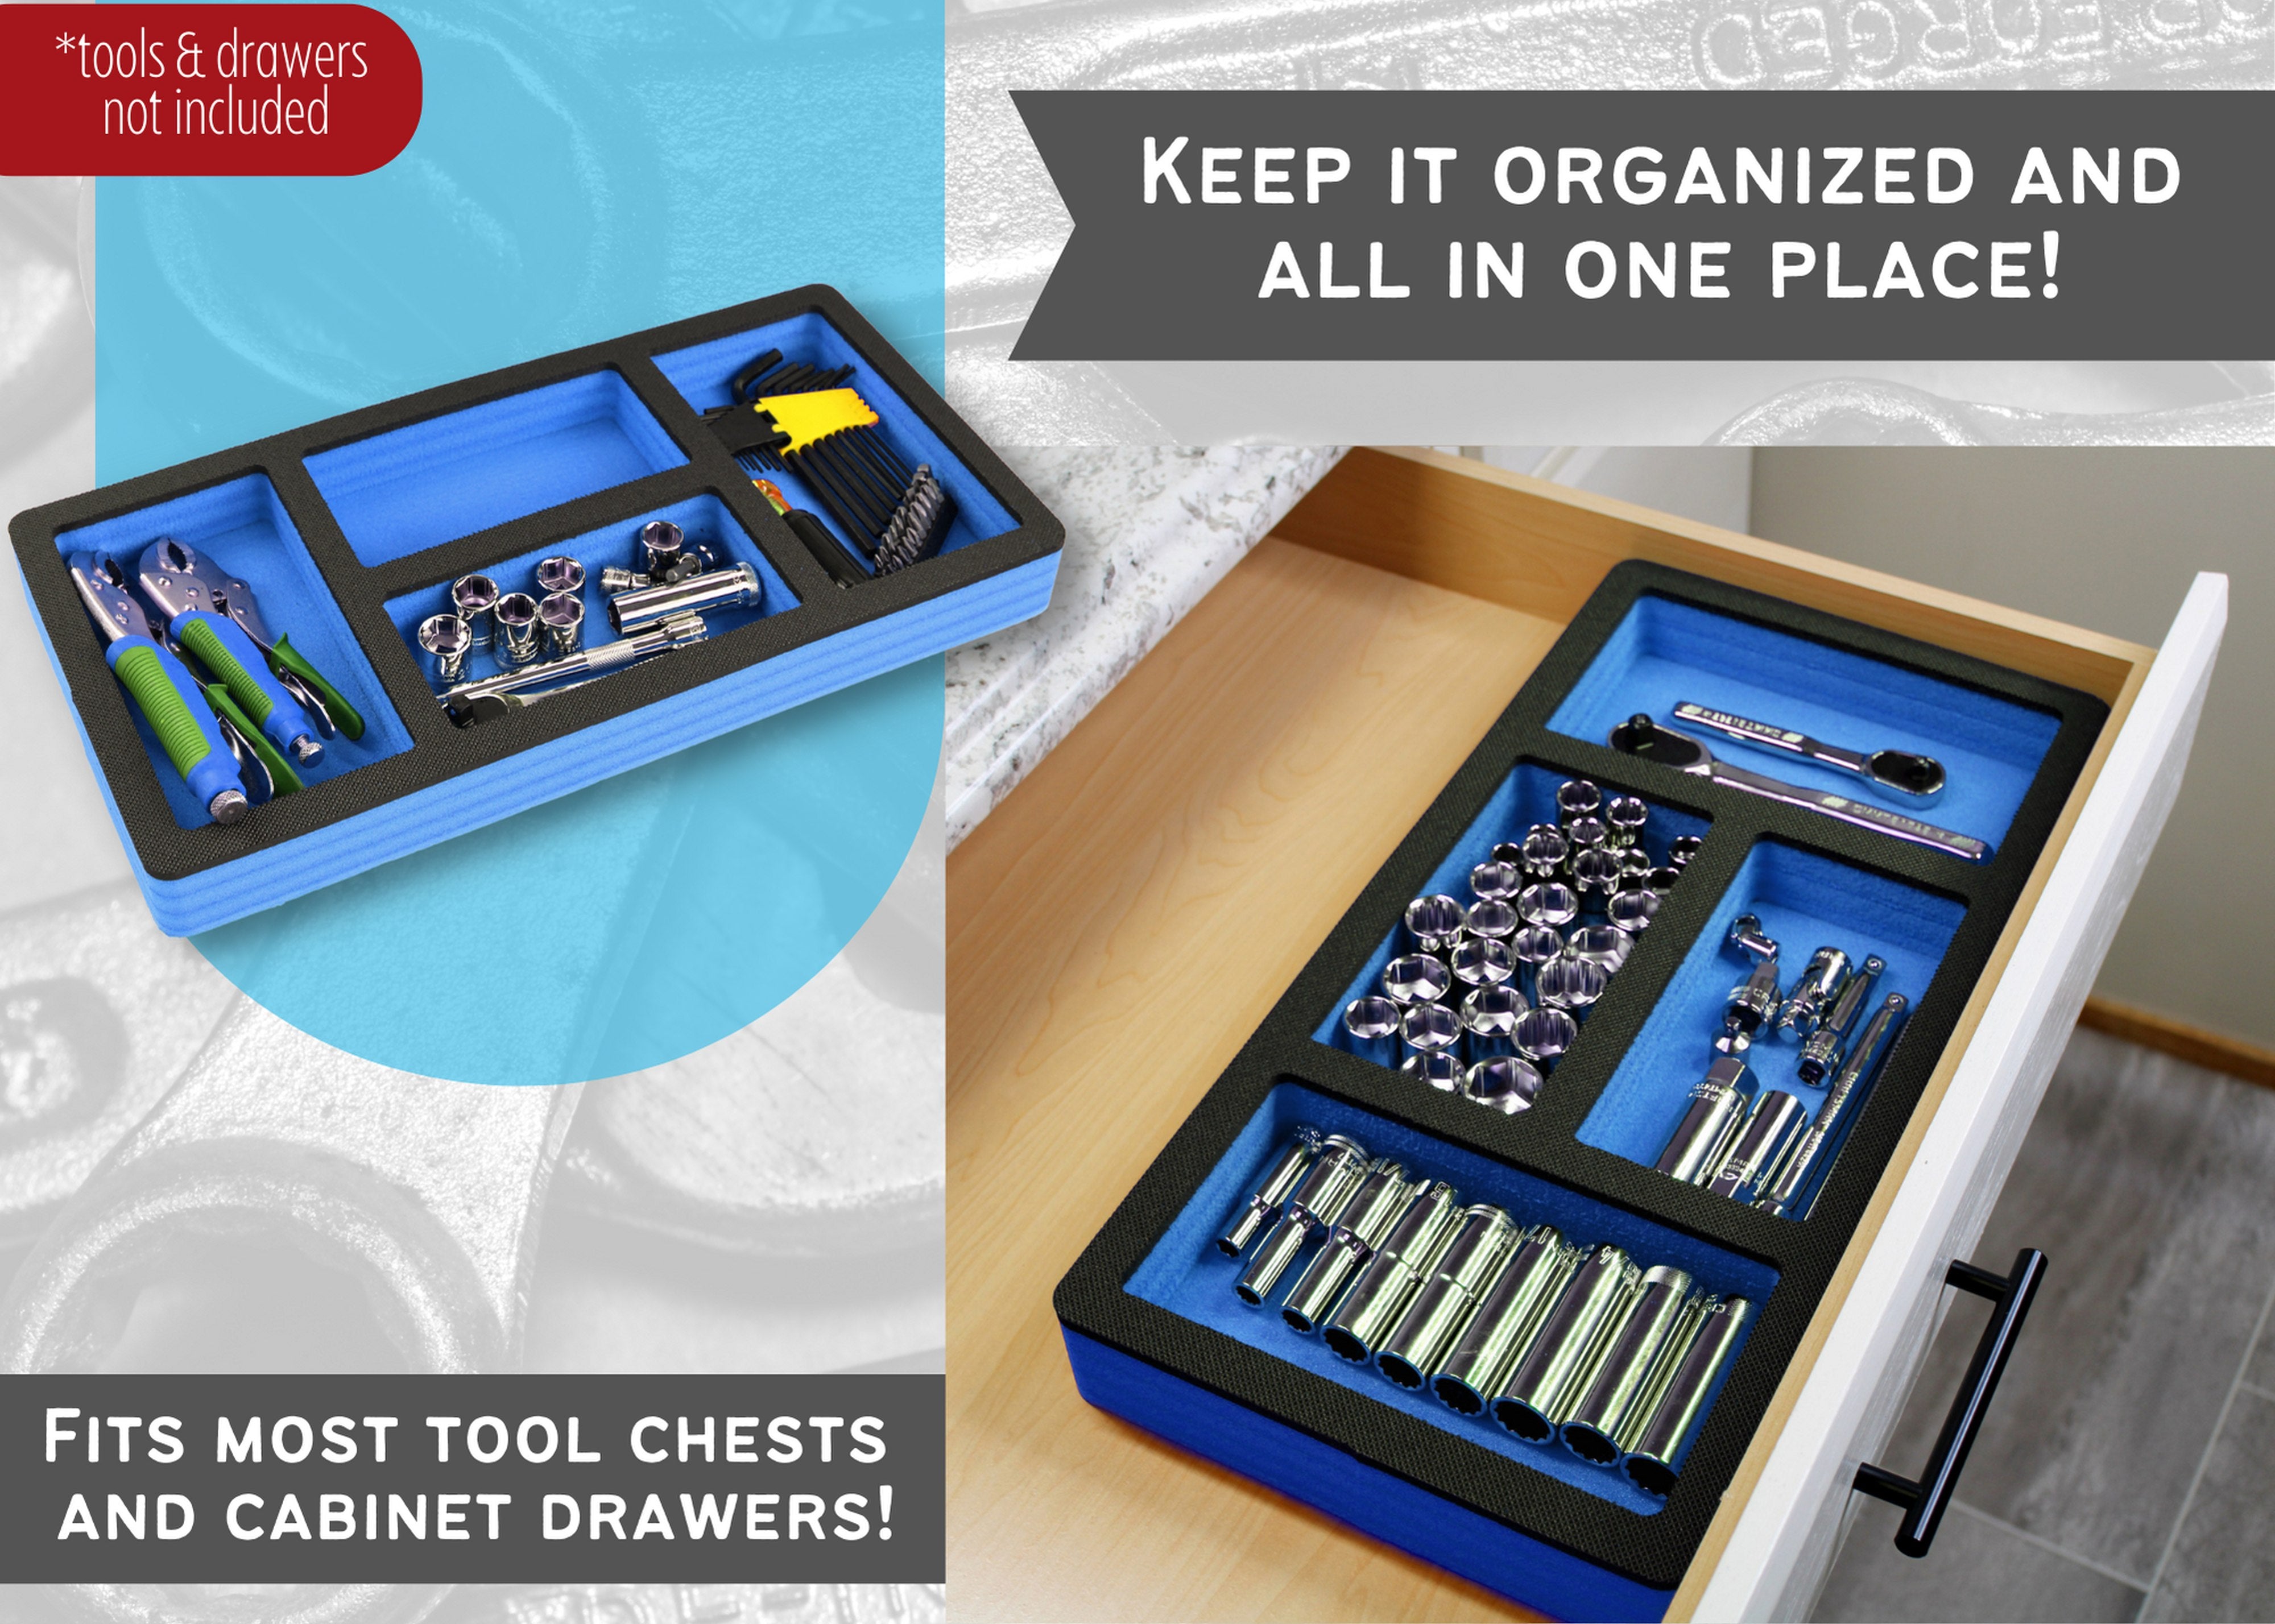 Tool Drawer Organizer Insert Blue and Black Durable Foam Strong Non-Slip Anti-Rattle Bin Holder Tray 20 x 10 Inches 4 Large Pockets Fits Craftsman Husky Kobalt Milwaukee and Many Others